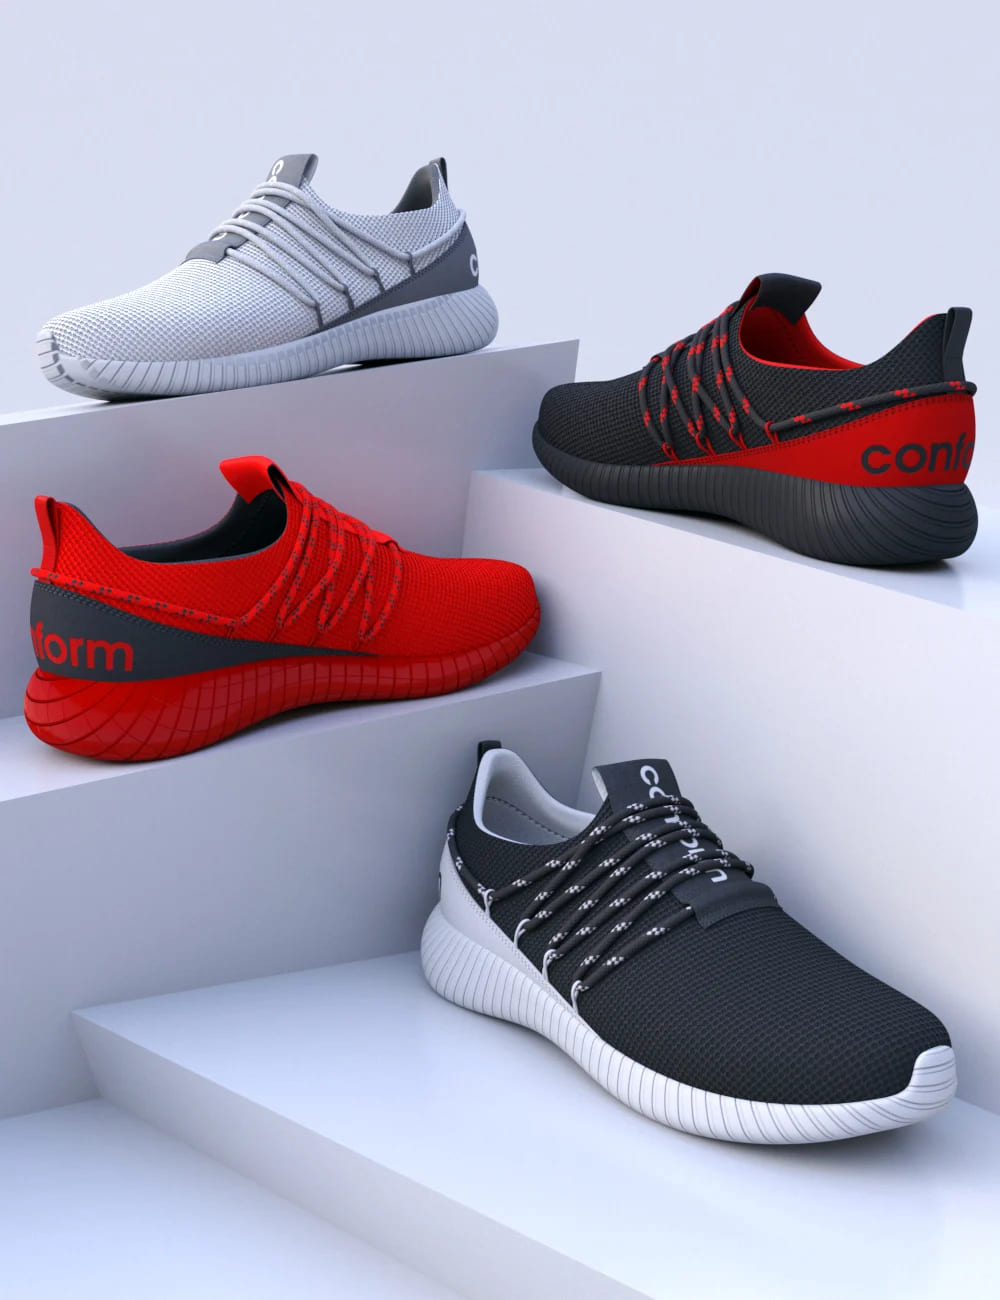 HL Conform Sneakers for Genesis 8 and 8.1 Males_DAZ3D下载站